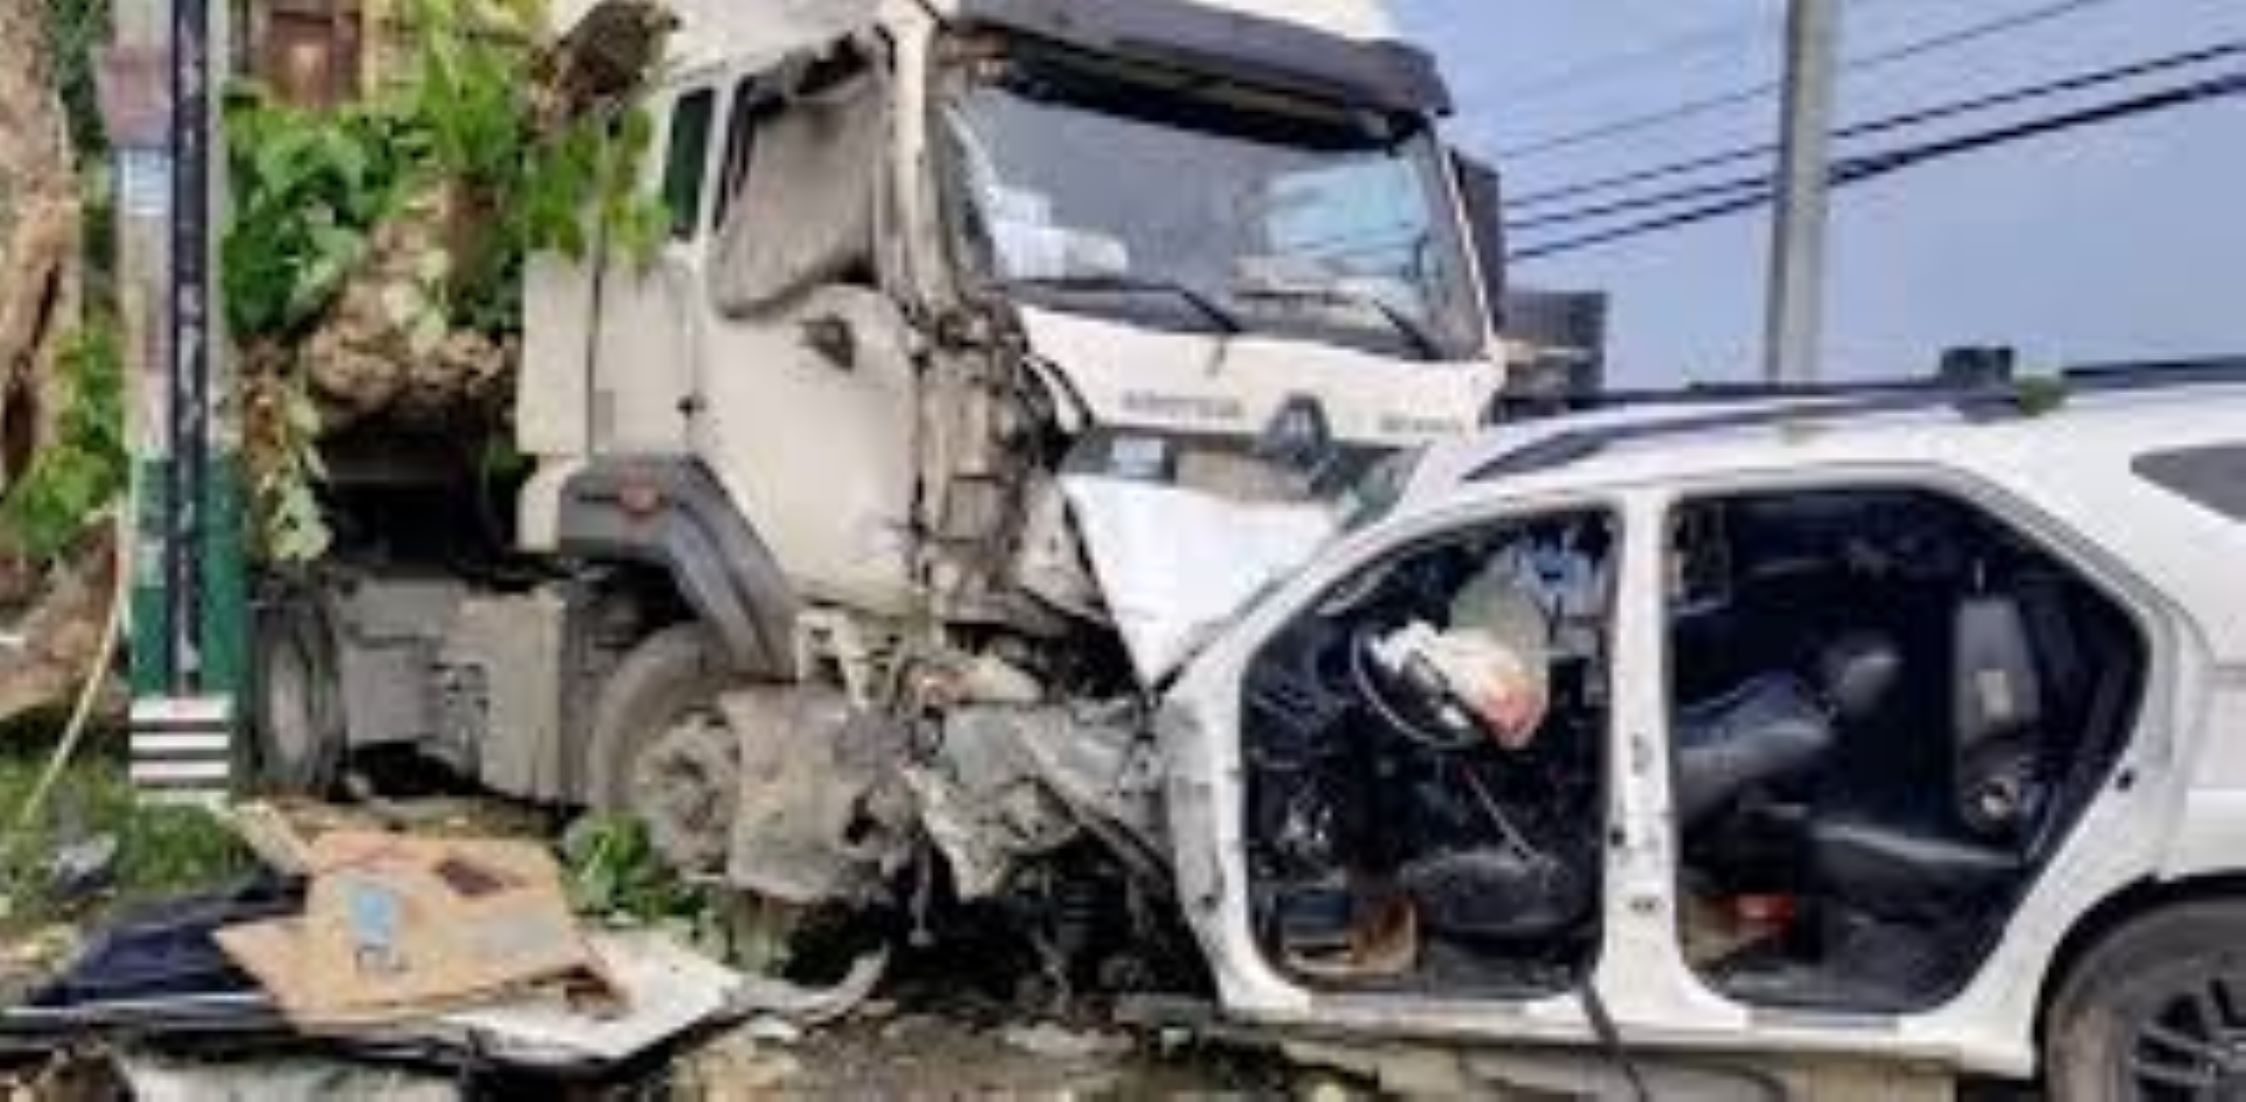 Road Crash In Central Philippines Killed Four, Injured Three